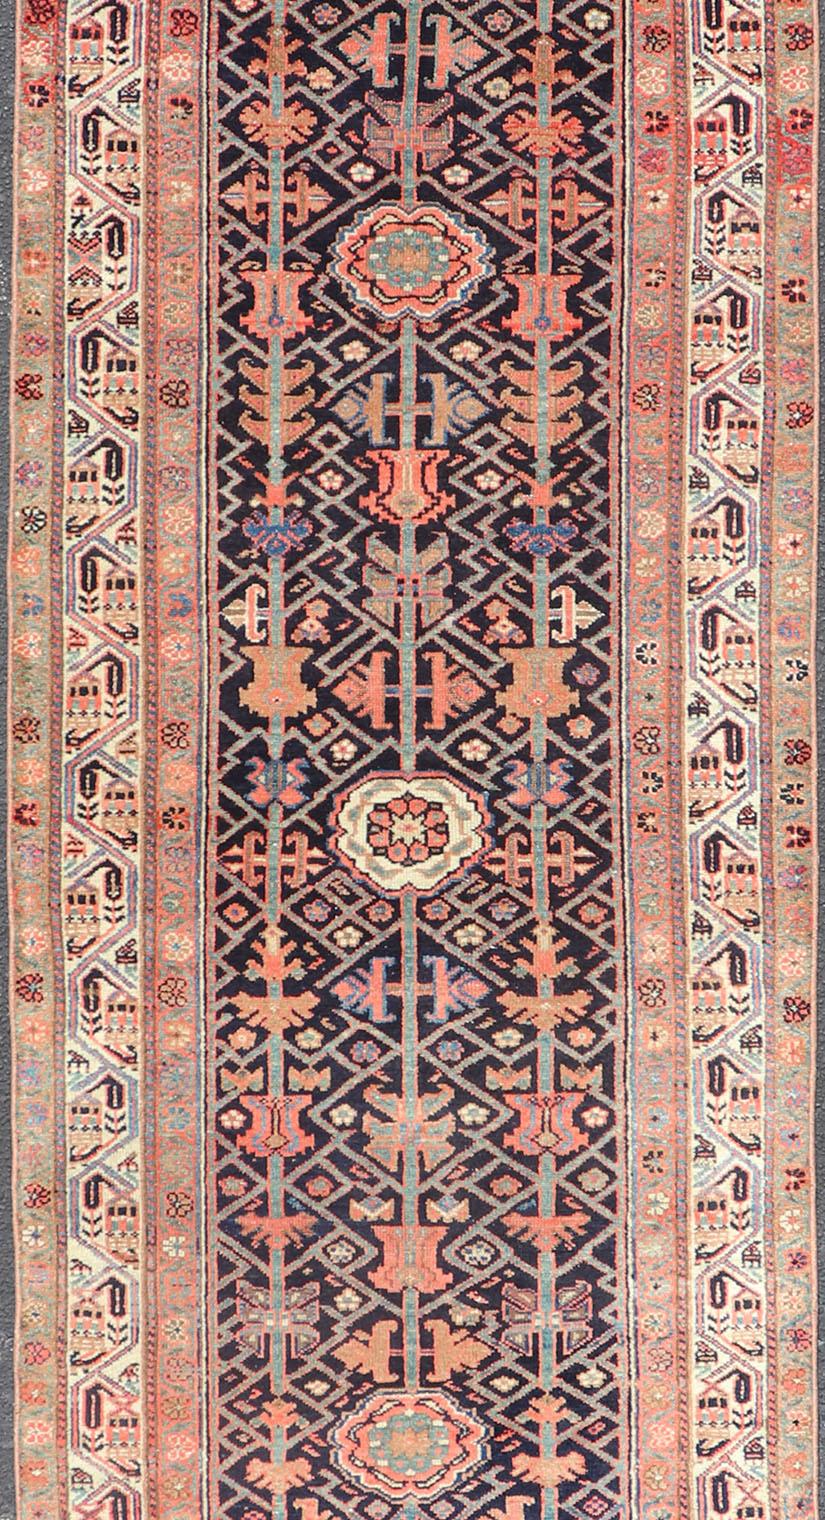 Malayer antique runner from Persia with geometric floral central field design, rug ZIR-58-KV-04, country of origin / type: Iran / Malayer, circa 1910.

This antique Persian Malayer runner, circa early 20th century, relies heavily on exquisite